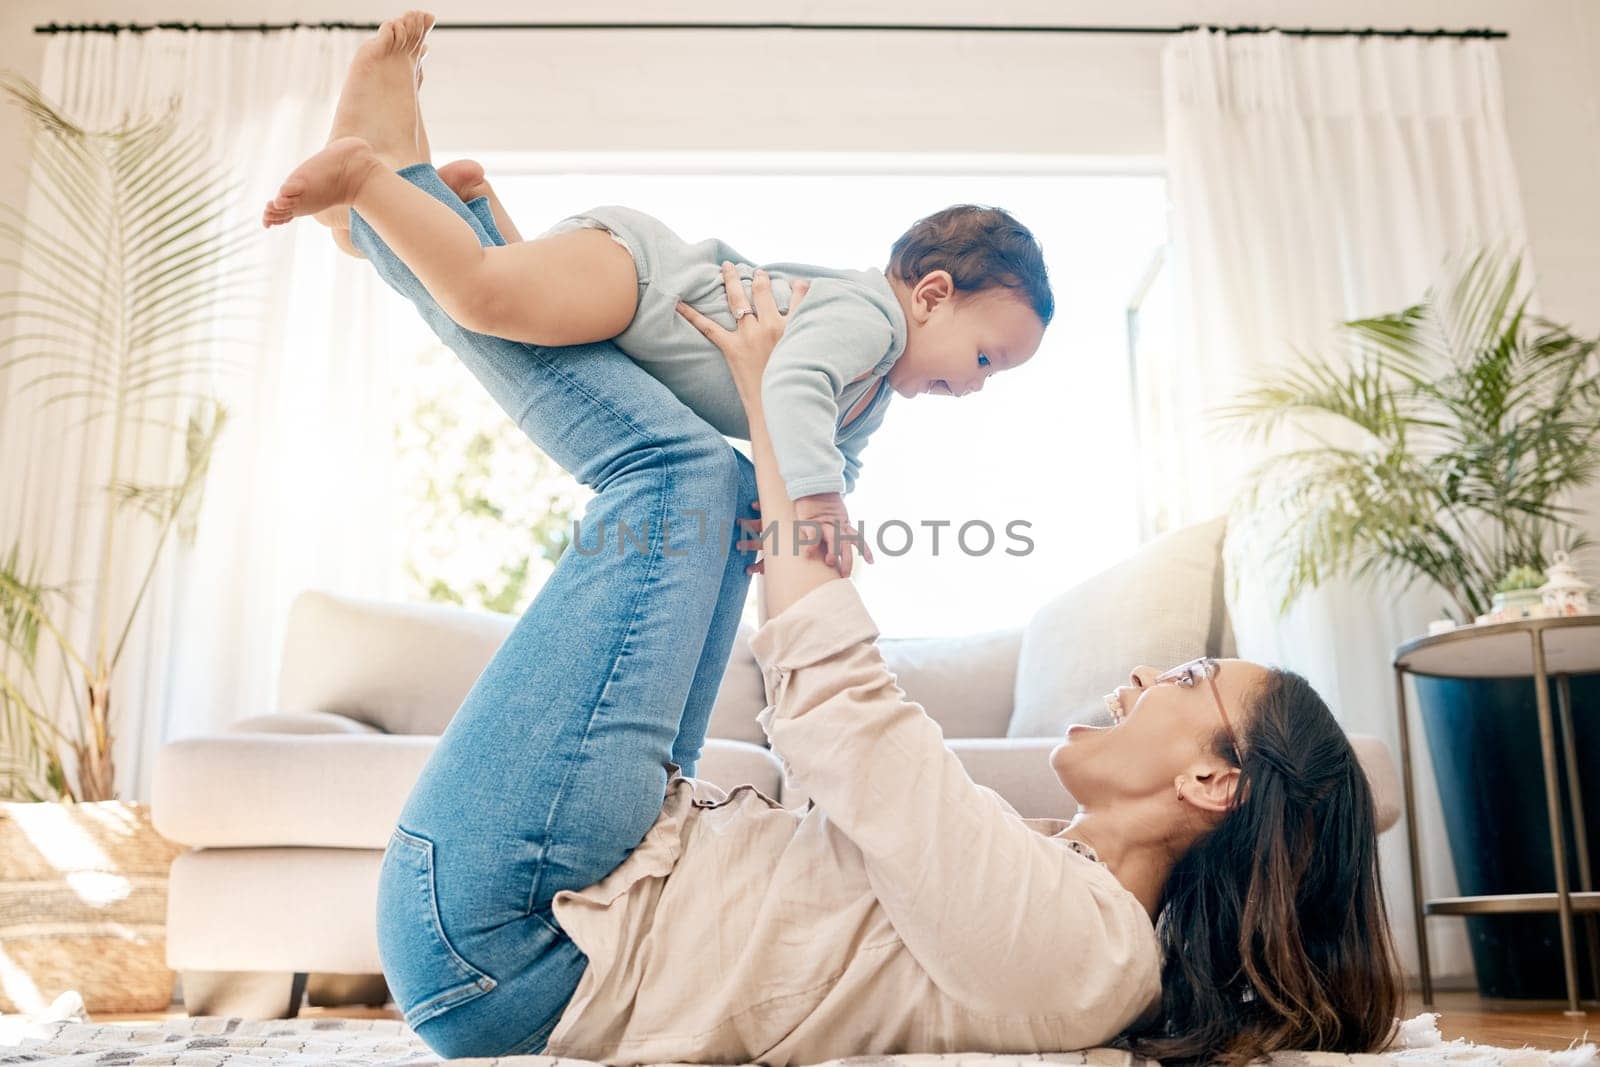 Play, love and mother lift baby for bonding, quality time and child development together in family home. New born, motherhood and happy mom with infant for care, support and playing in living room.